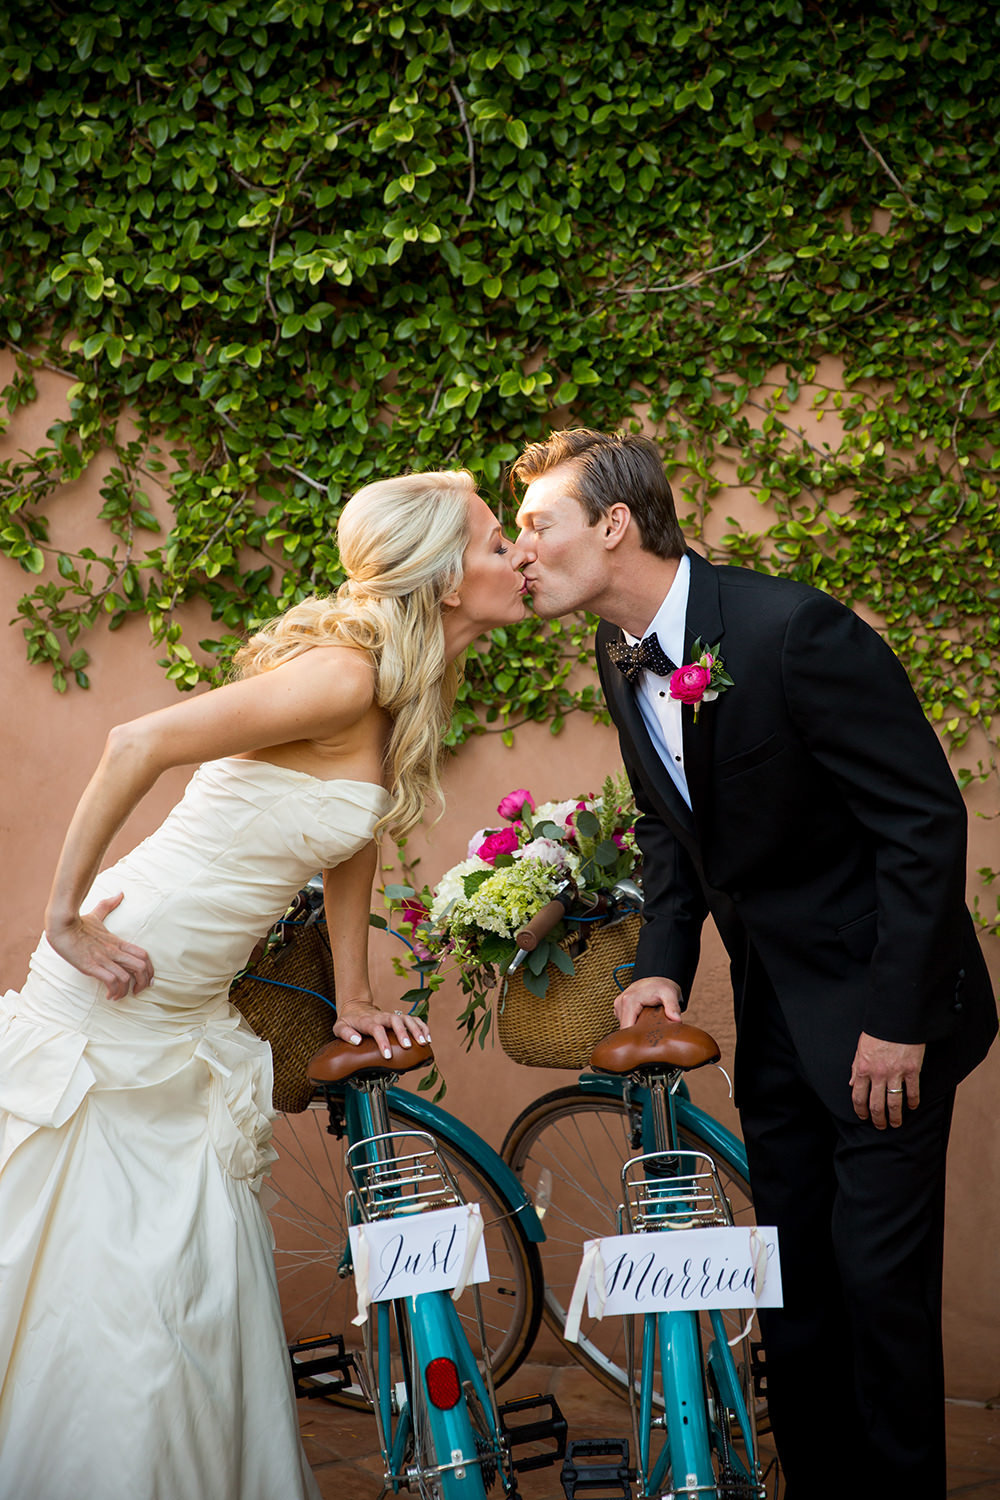 Smooching with fun bicycle wedding day props